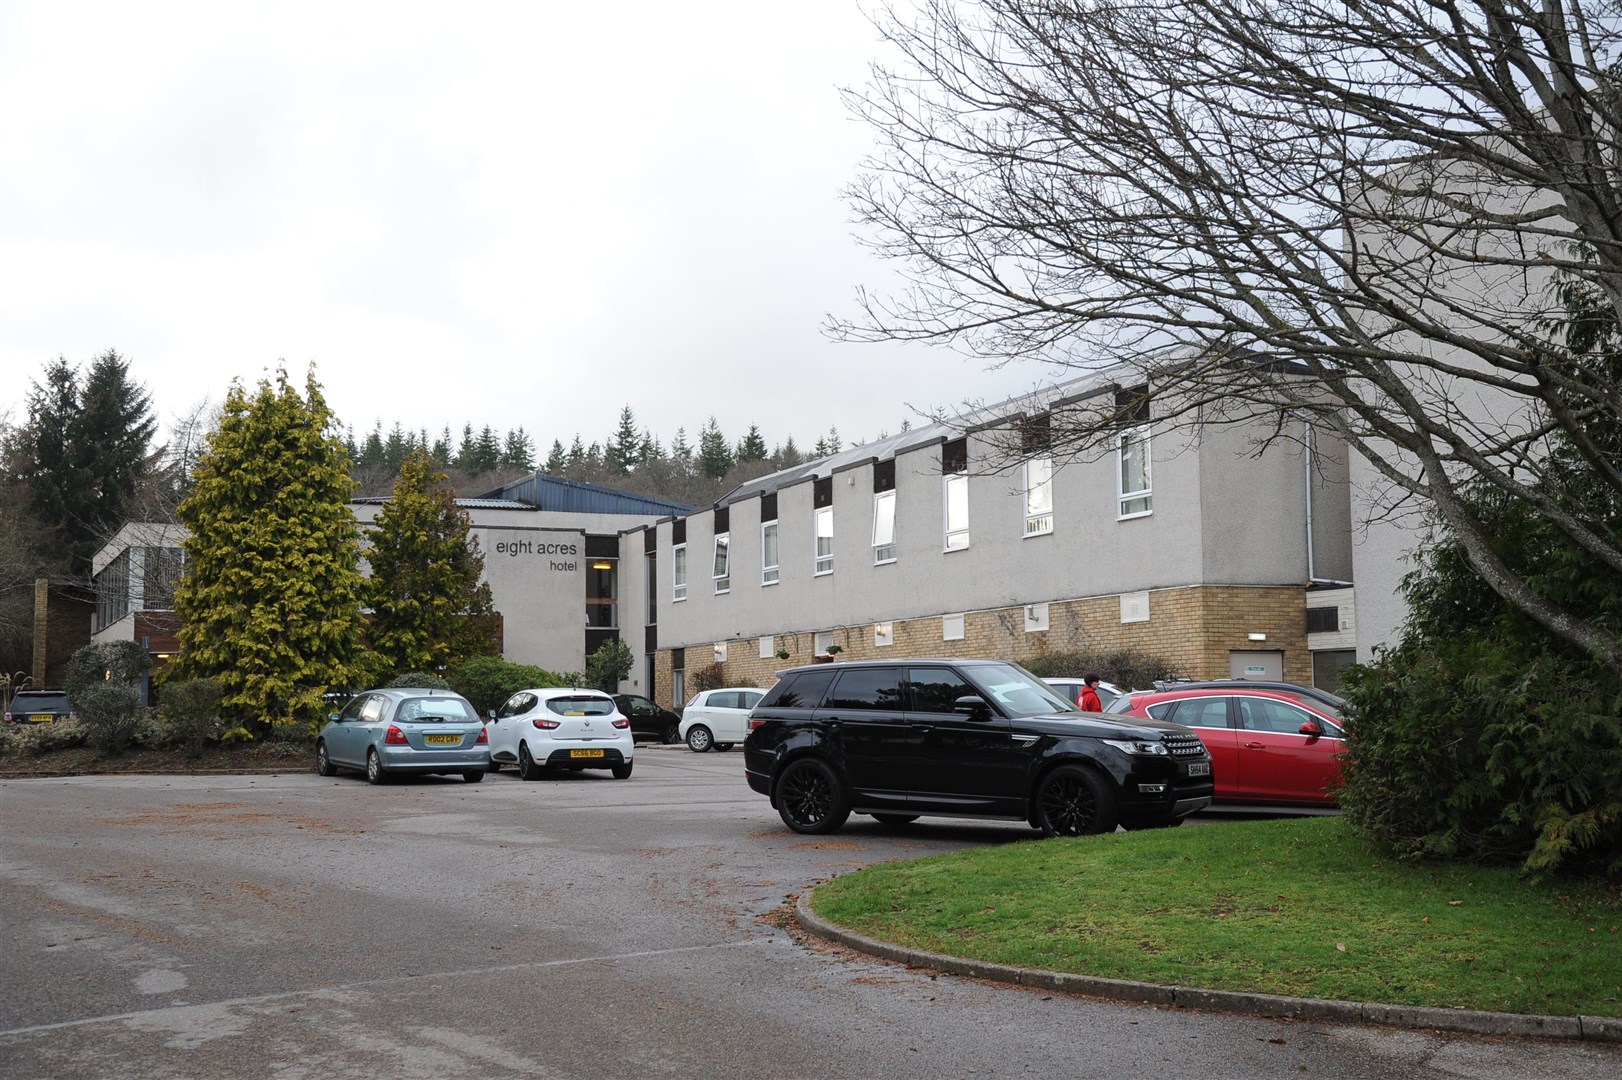 Eight Acres Hotel in Elgin closed on Sunday to house asylum seekers. Picture: Eric Cormack